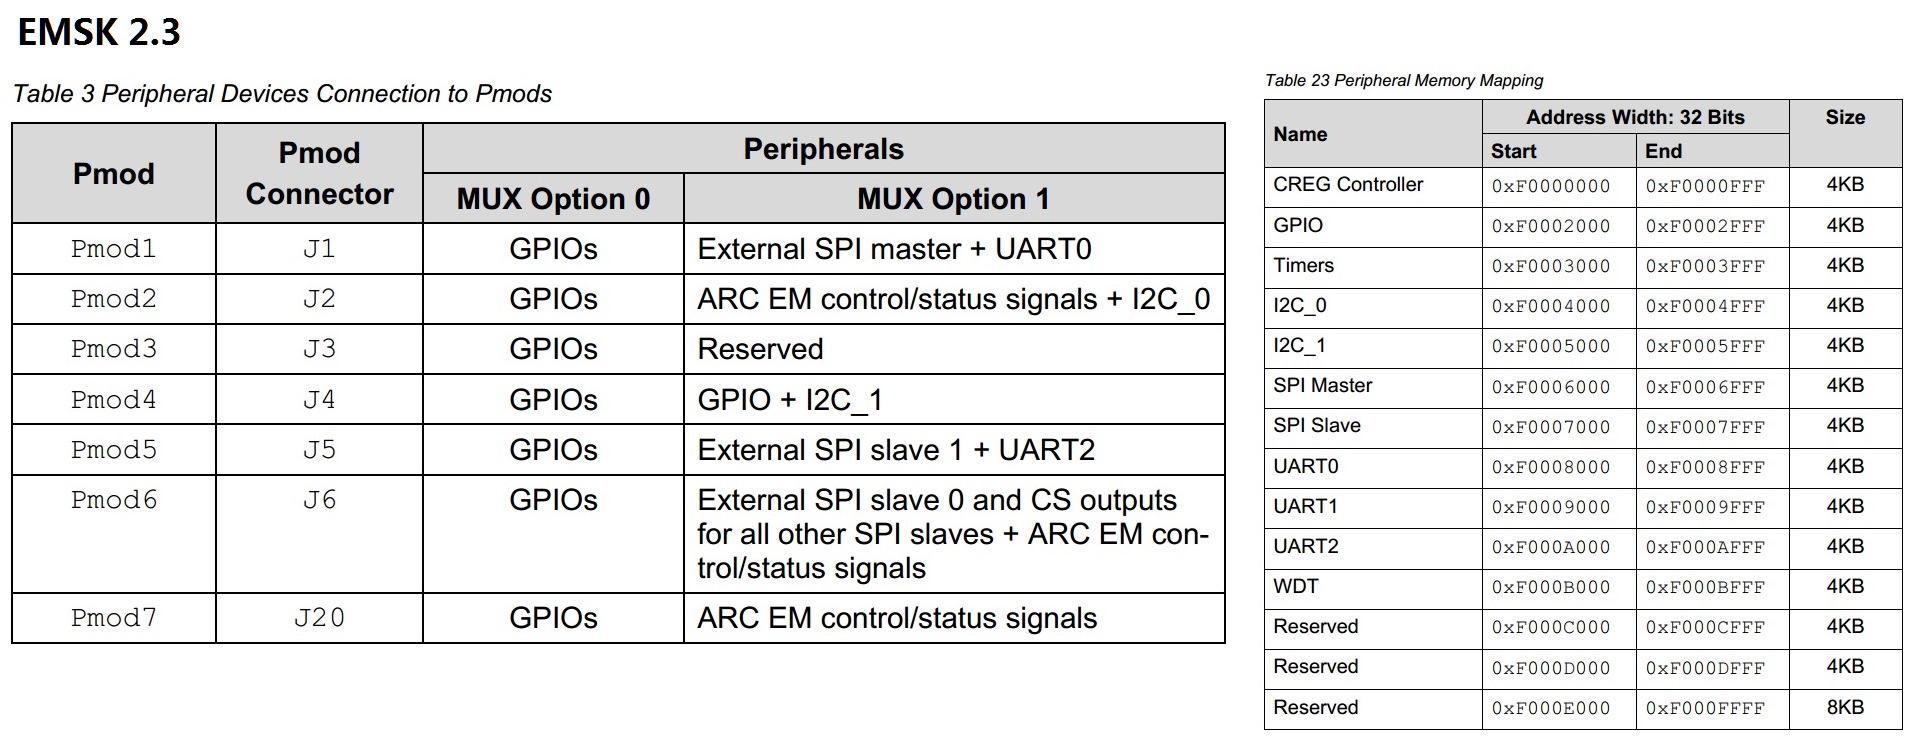 EMSK 2.3 - Peripheral Connections and Memory Mapping